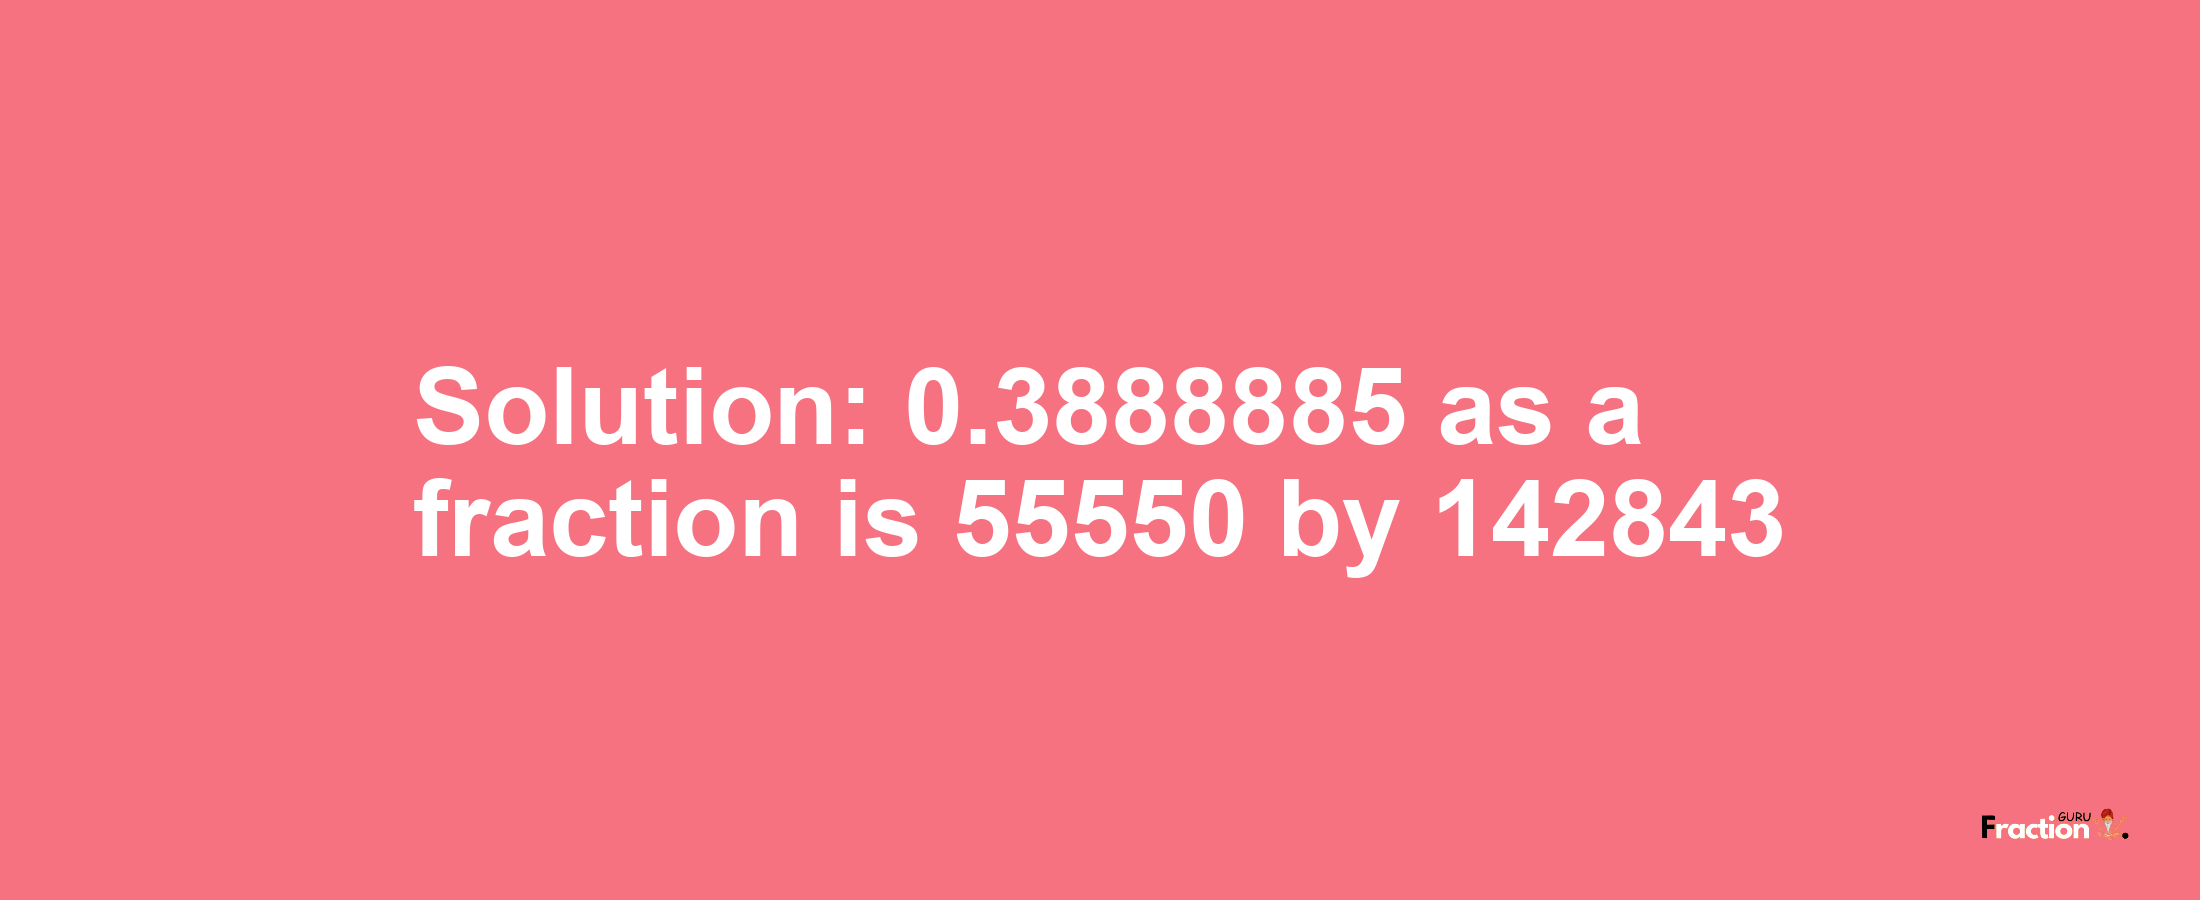 Solution:0.3888885 as a fraction is 55550/142843